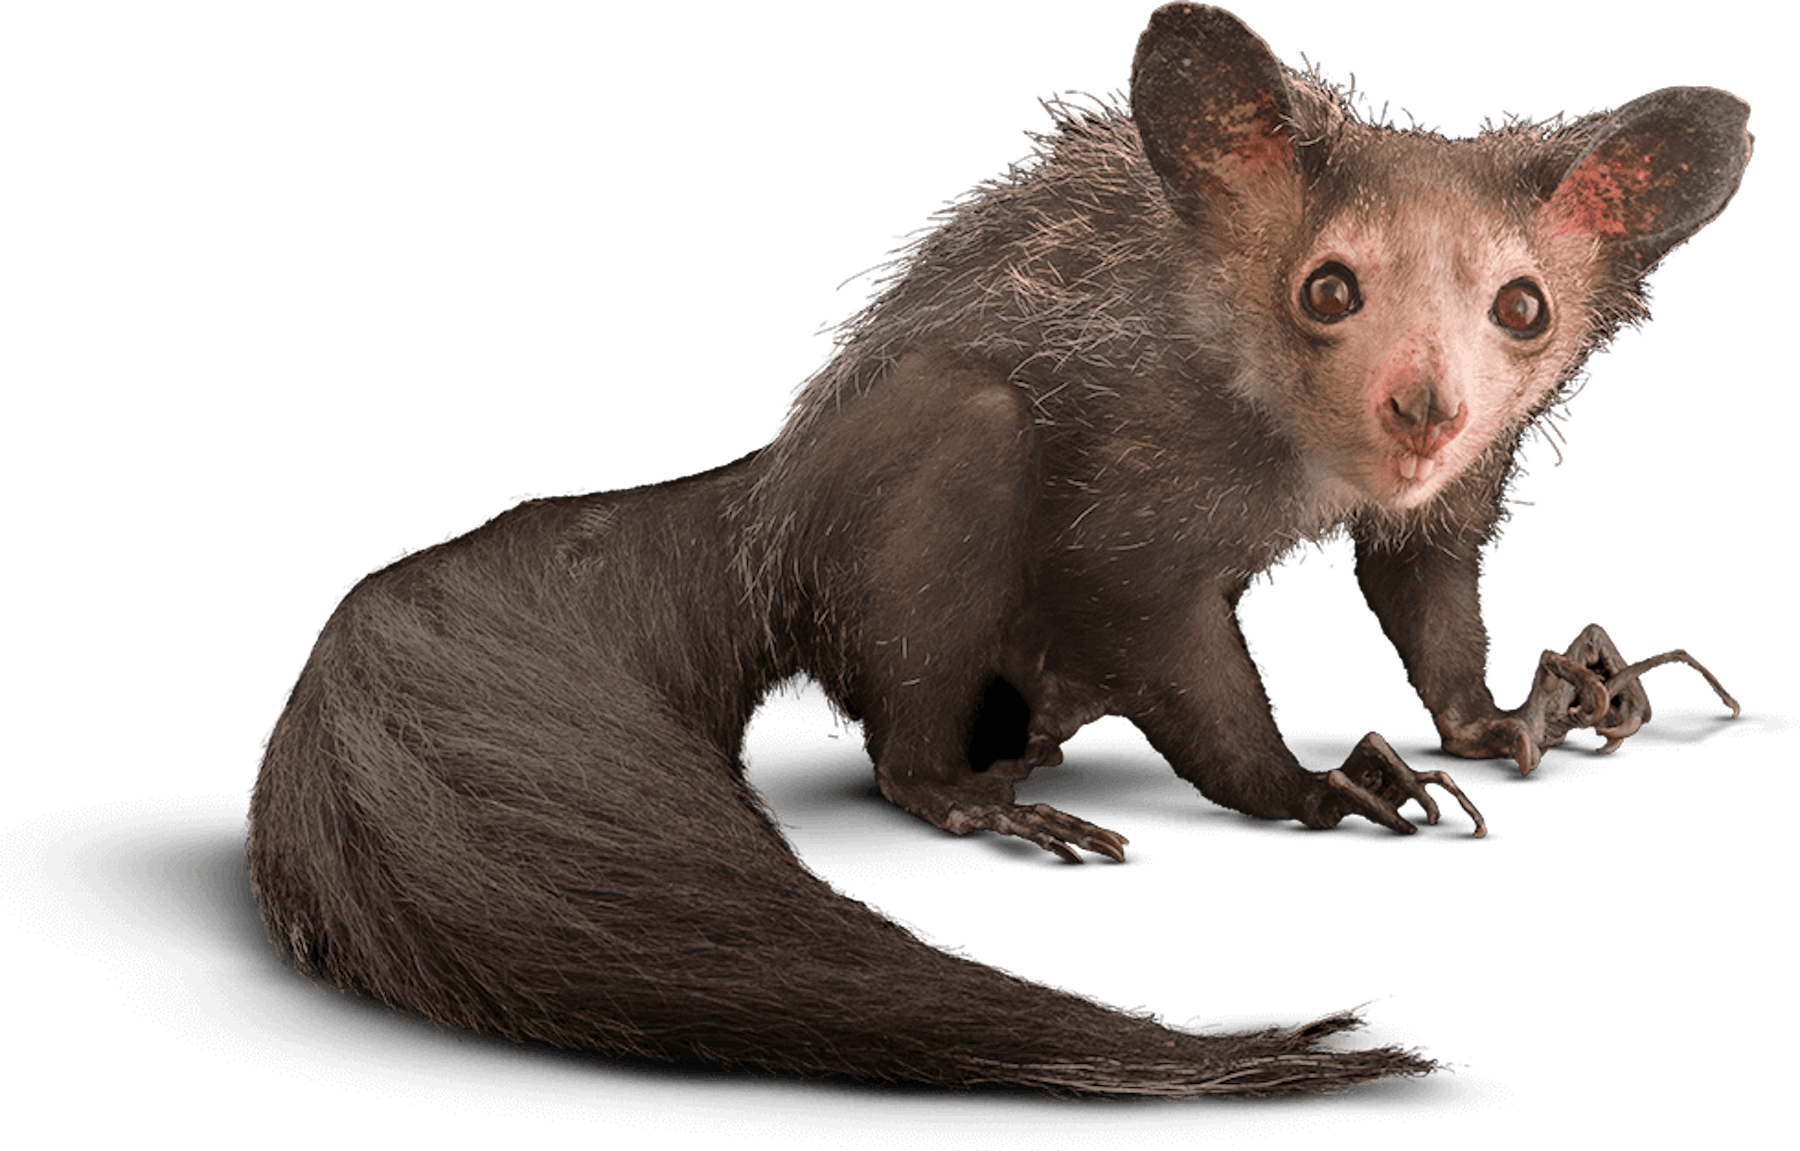 10 Wild Facts About the Aye-Aye, a Most Improbable Animal 